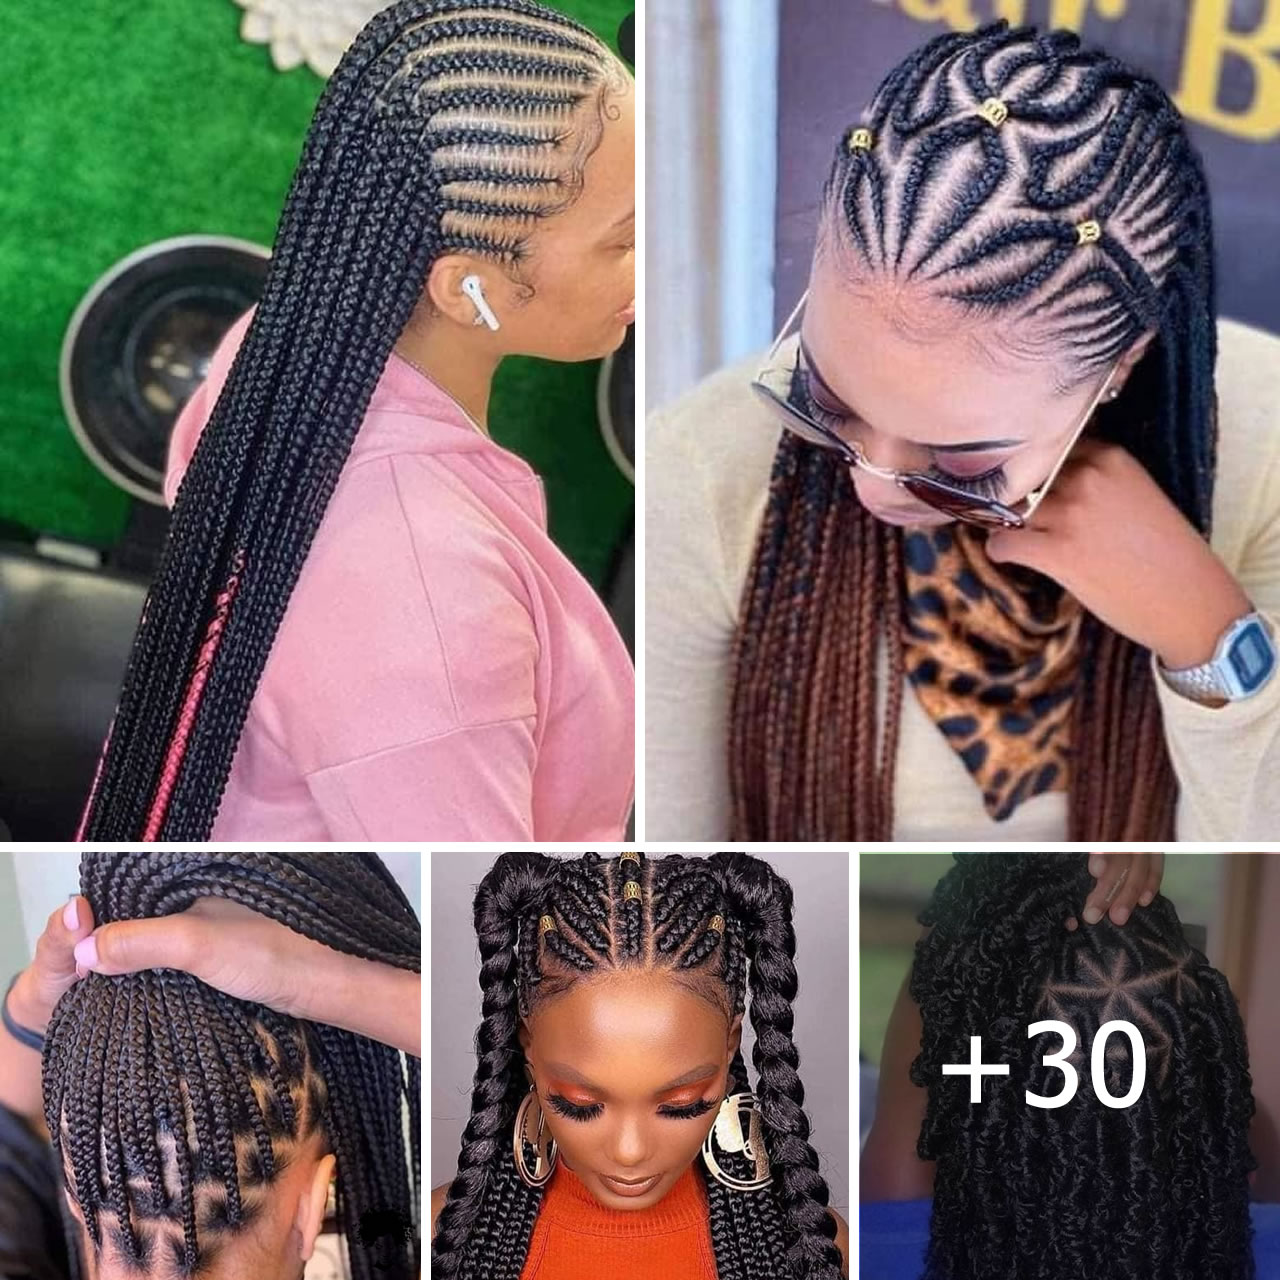 Stylish Recent Braided Hairstyles You Should Consider, Volume 2.